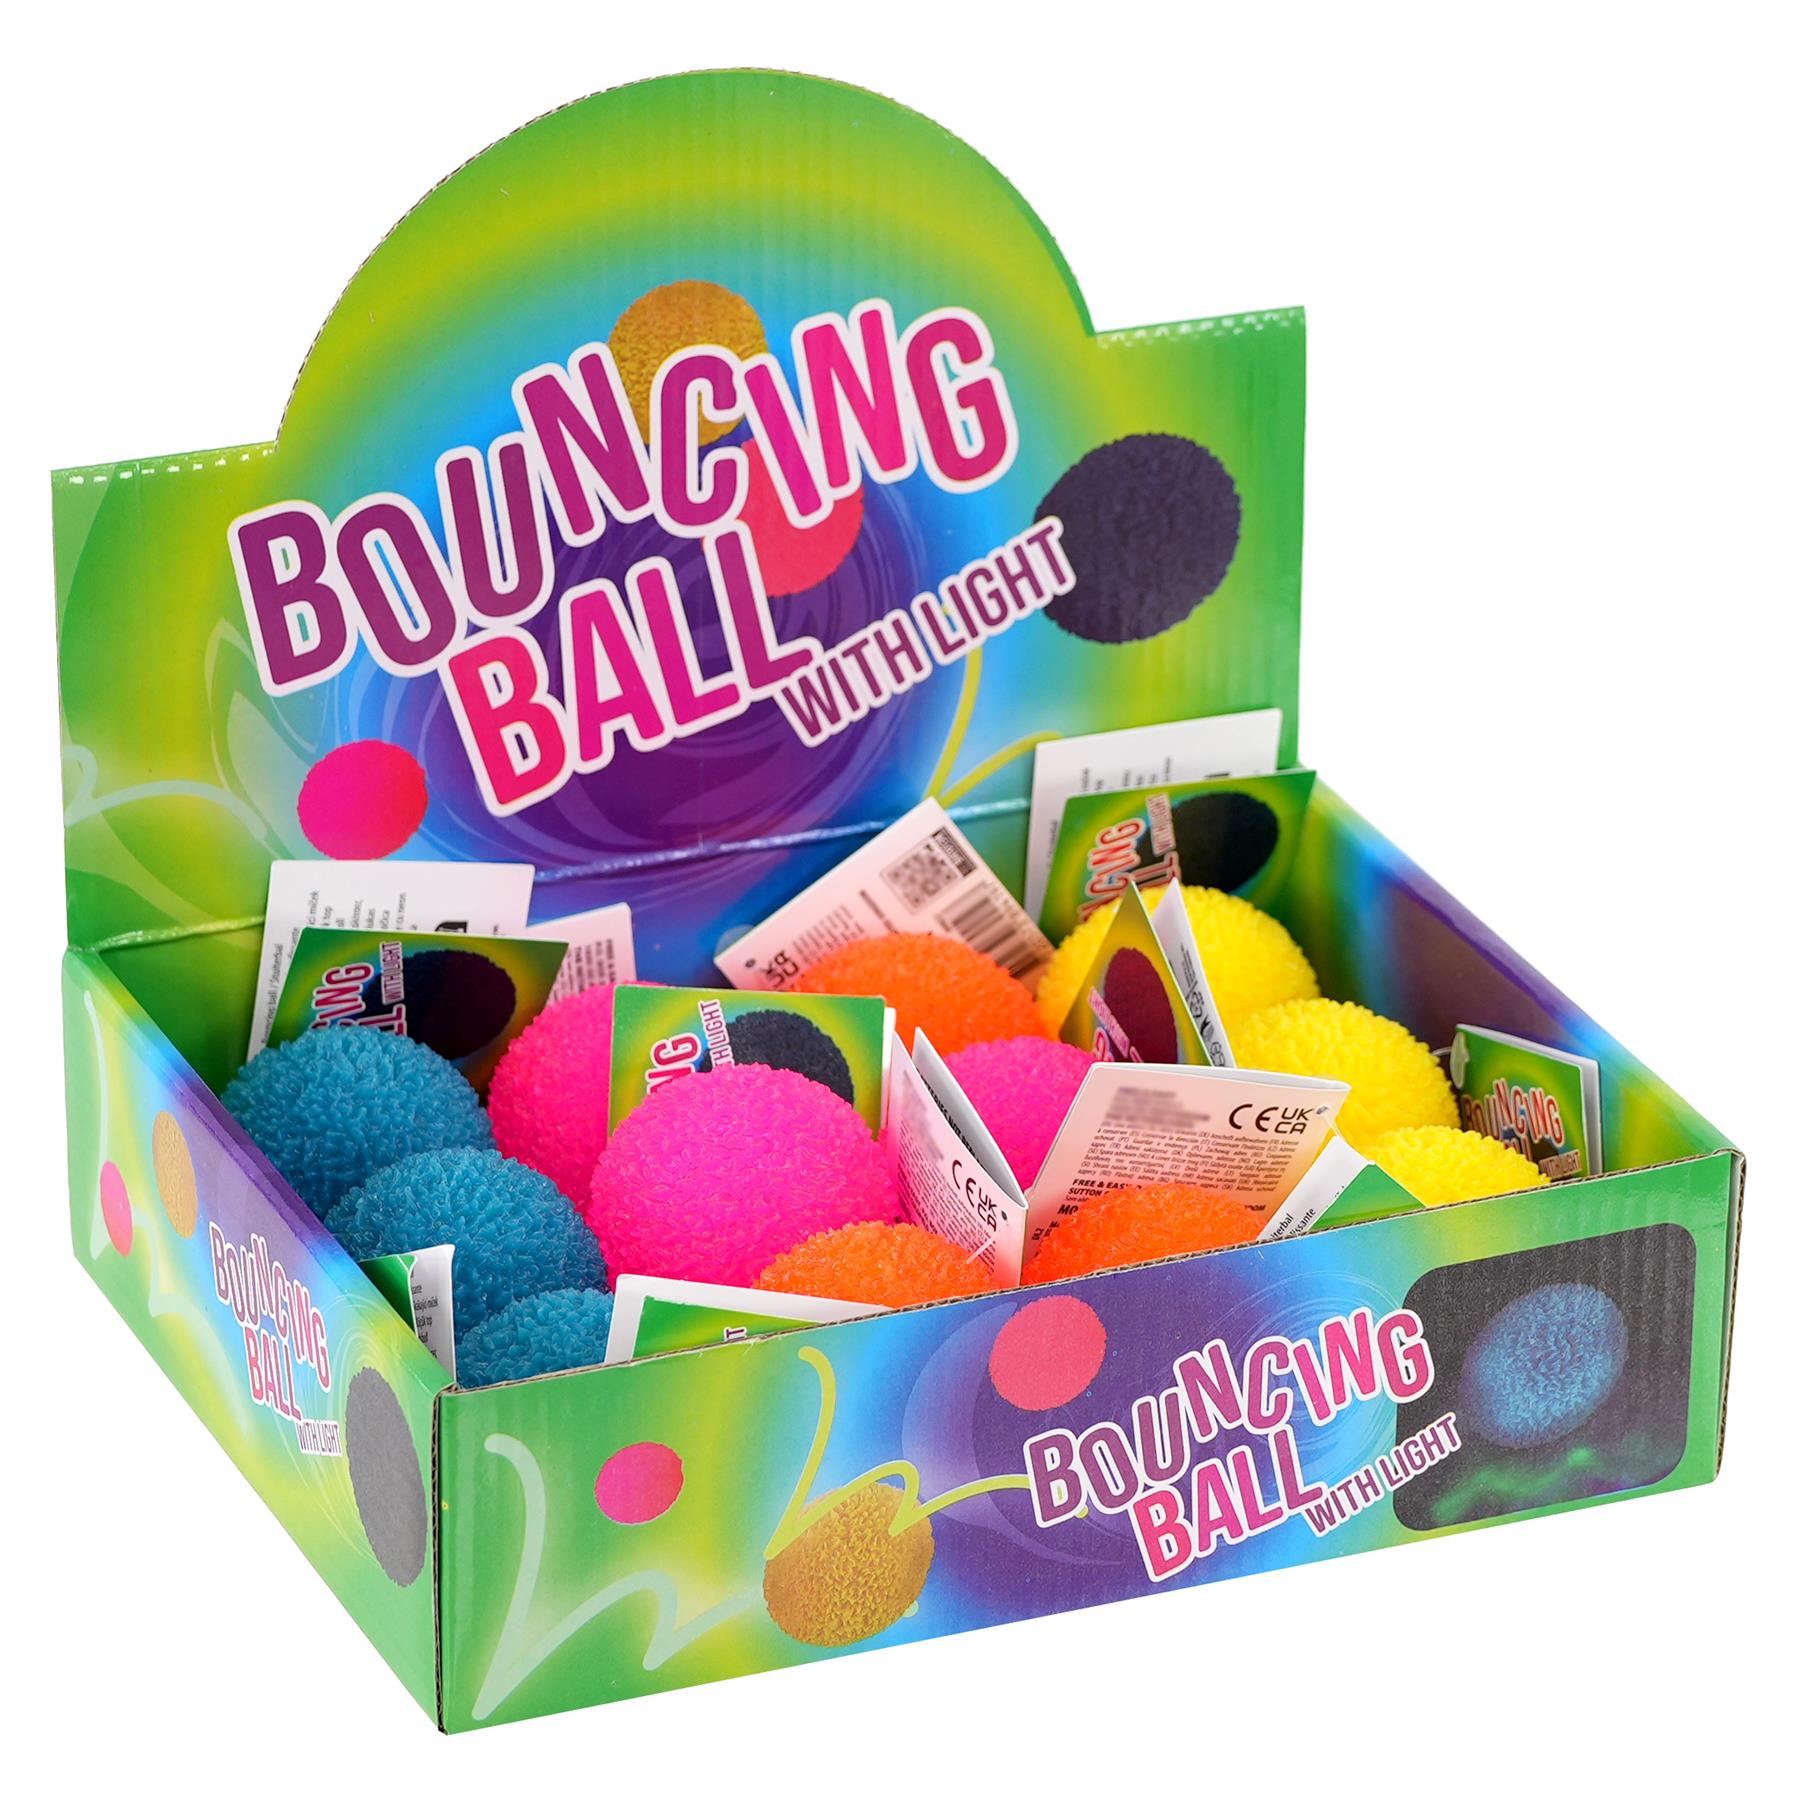 Flashing Rubber Bouncy Ball by The Magic Toy Shop - The Magic Toy Shop